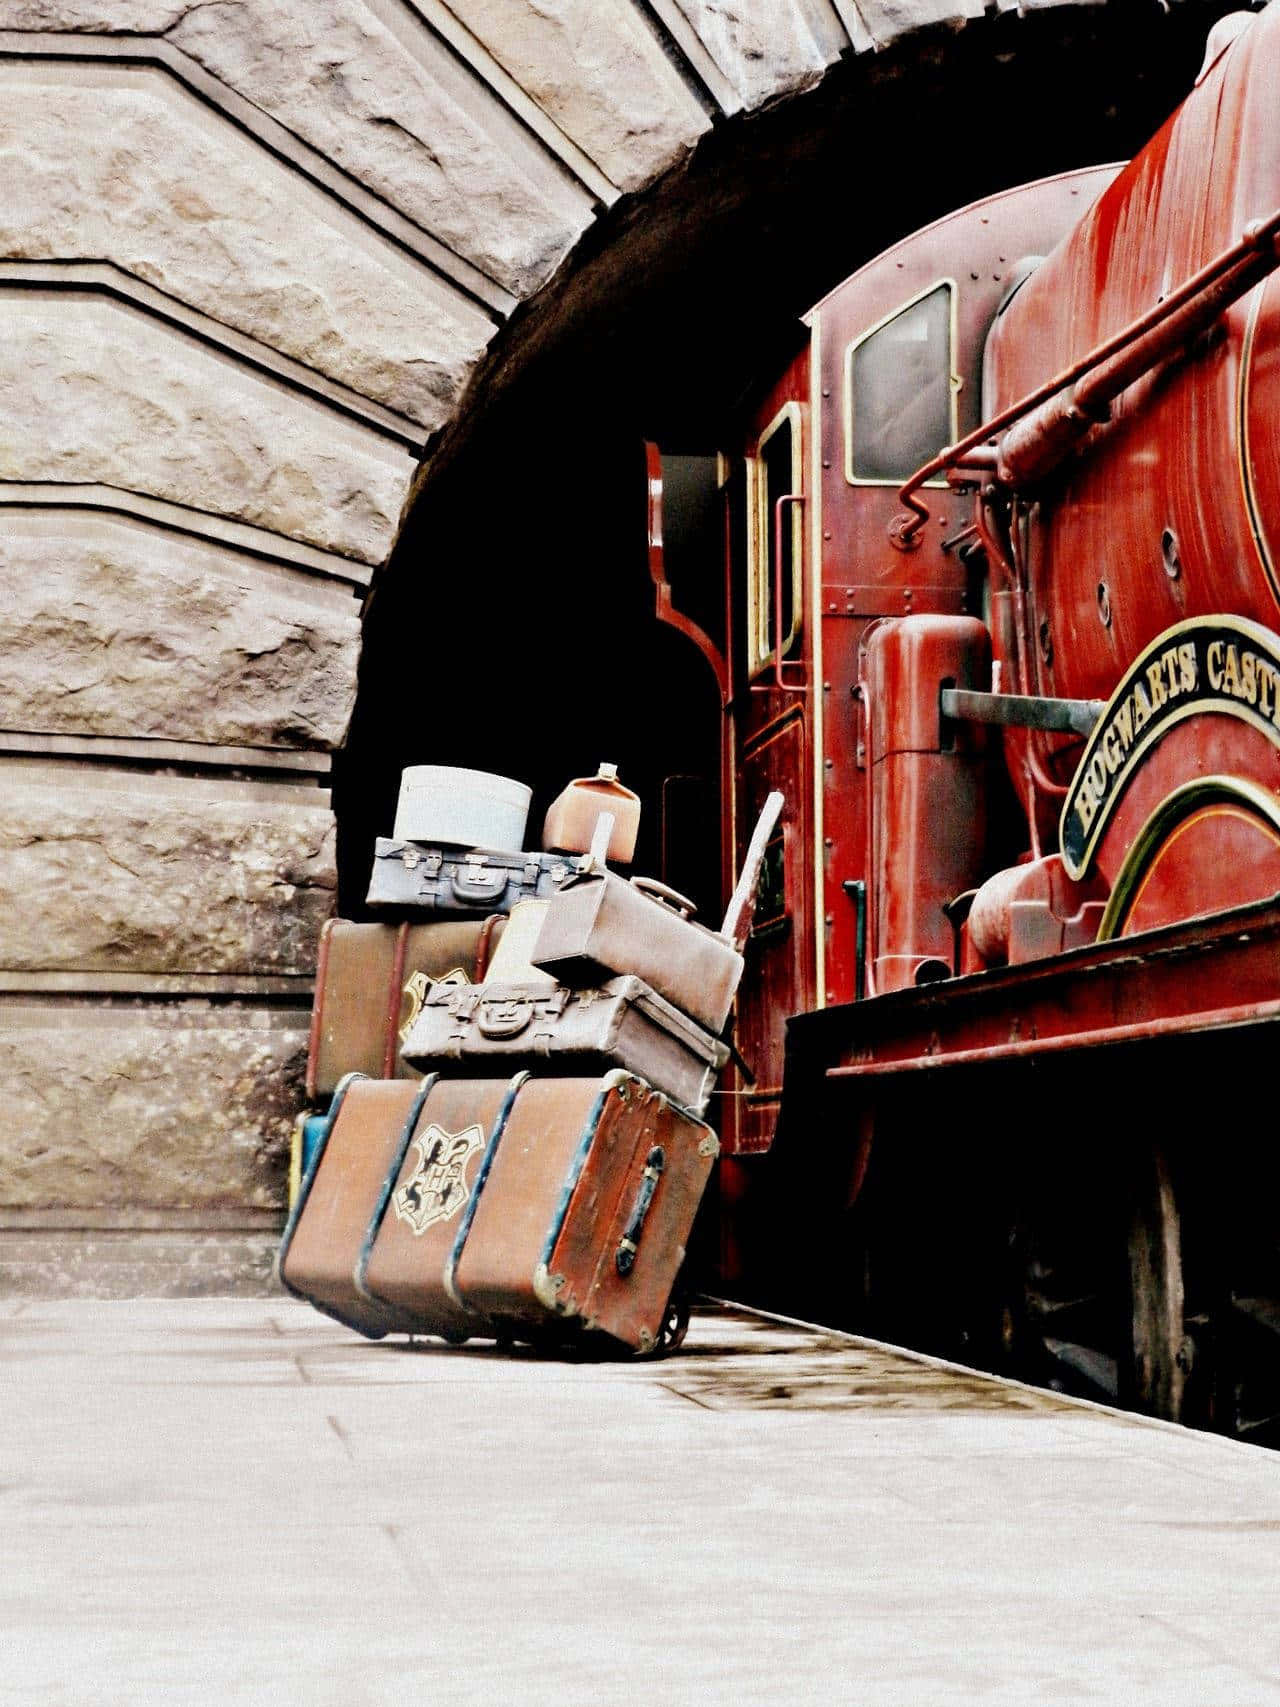 Caption: The Magical Journey Awaits on the Hogwarts Express Wallpaper